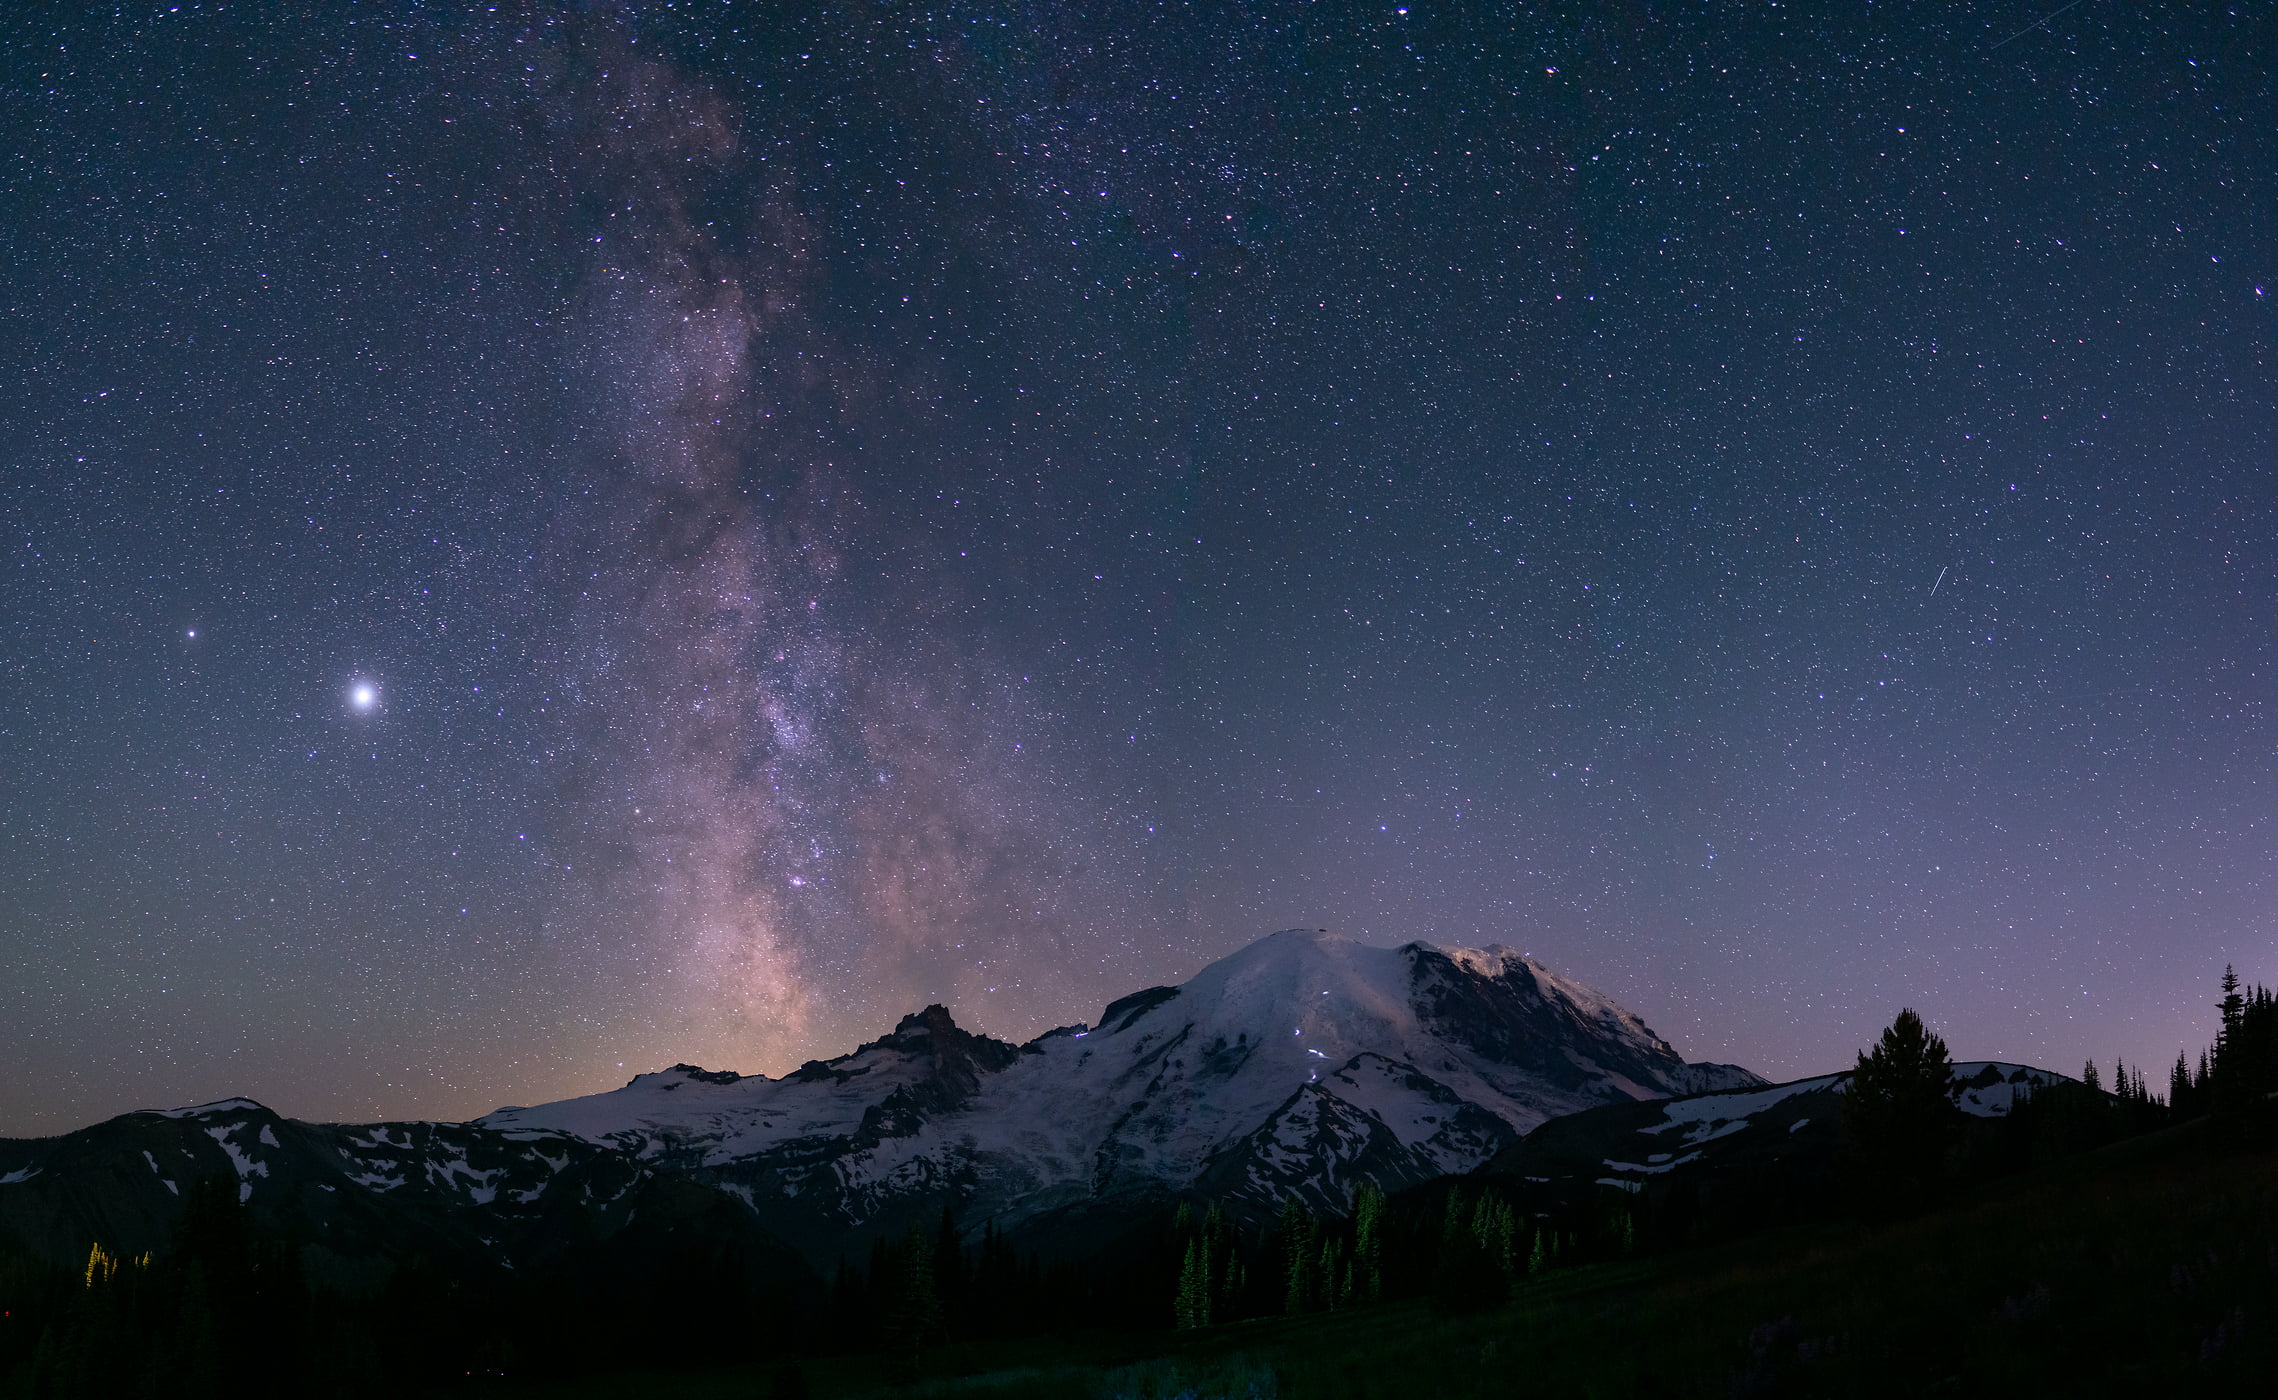 157 megapixels! A very high resolution, large-format VAST photo print of Mt. Rainier at night with the Milky Way; landscape astrophotograph created by Greg Probst in Mt. Rainier National Park, Washington.